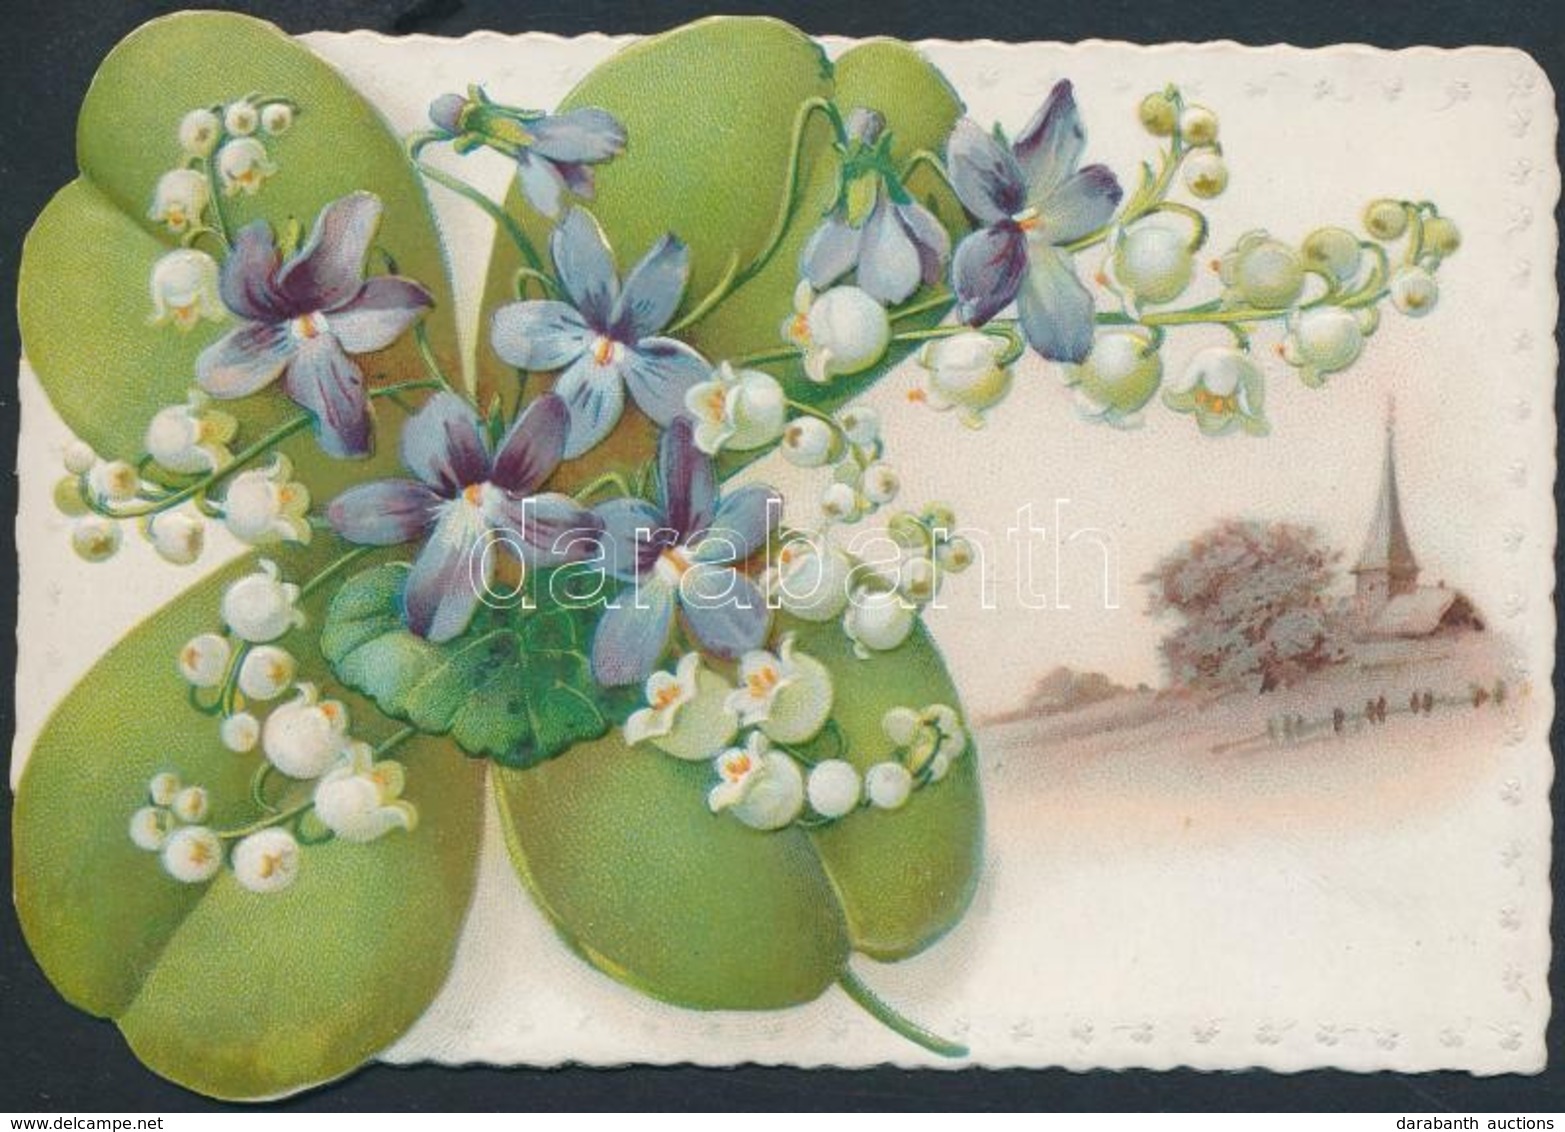 ** T1 Clover, Lily Of The Valley, Church, Litho, Emb., Floral, Small Size (11,2 Cm X 8 Cm) - Non Classés